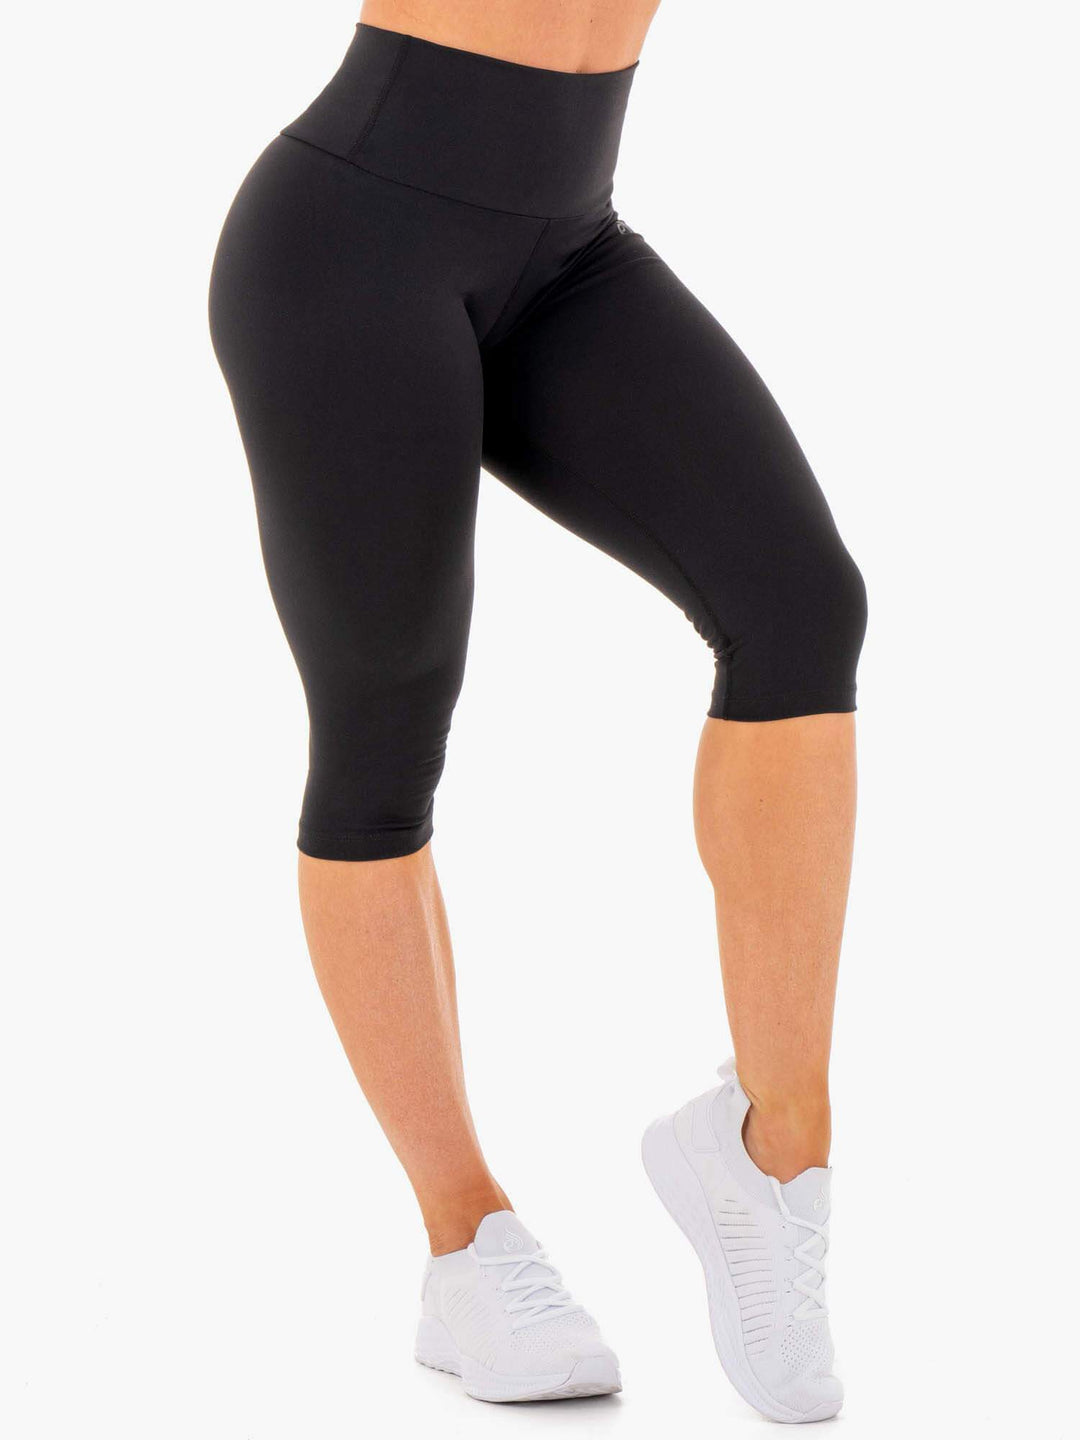 Just $39.95 Classic Women's High Waisted Yoga Pants.